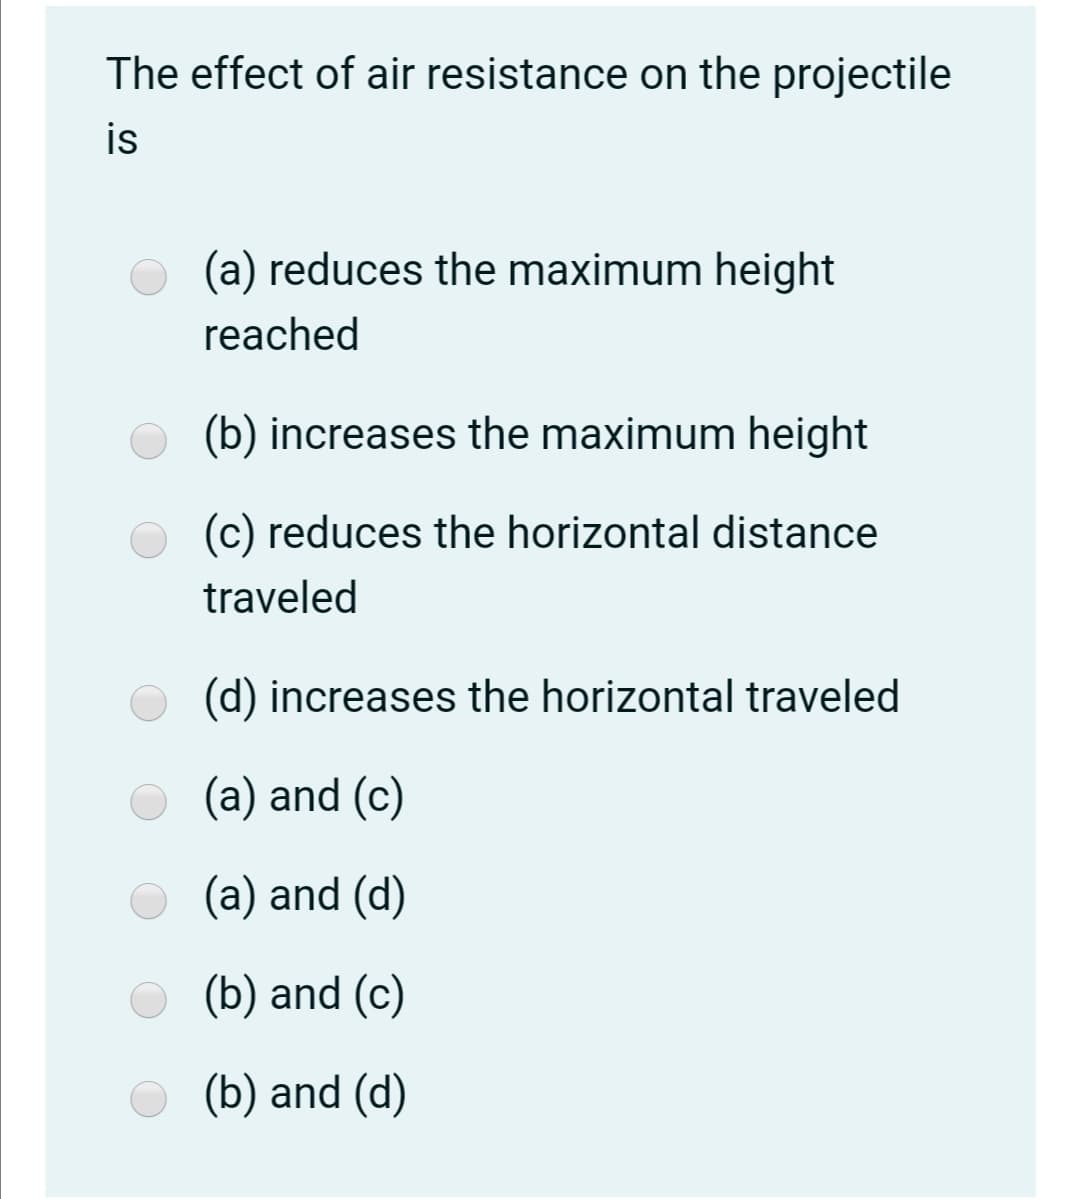 The effect of air resistance on the projectile
is
(a) reduces the maximum height
reached
(b) increases the maximum height
O (c) reduces the horizontal distance
traveled
(d) increases the horizontal traveled
(a) and (c)
(a) and (d)
(b) and (c)
(b) and (d)
